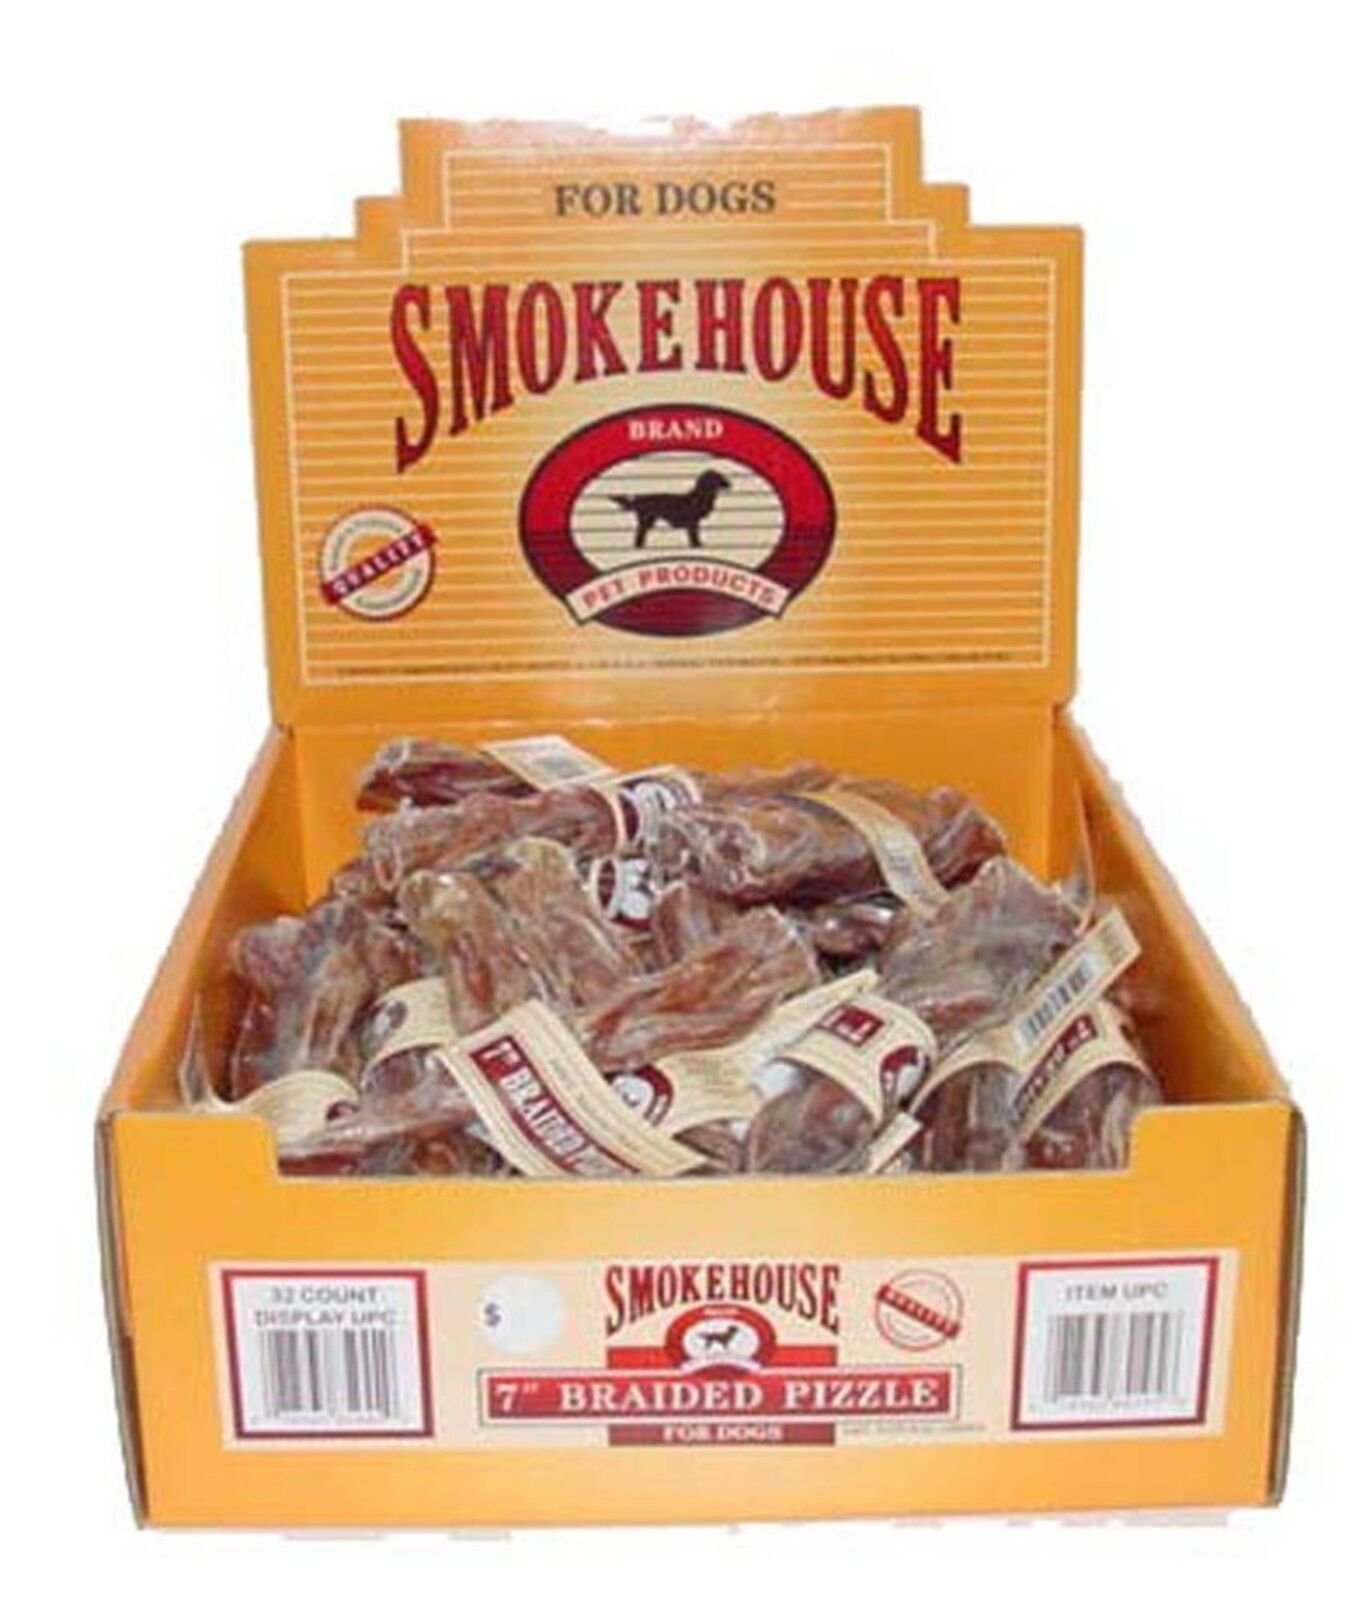 Smokehouse USA Made Braided Pizzle Dog Treats 32ea/7 in, 32 ct